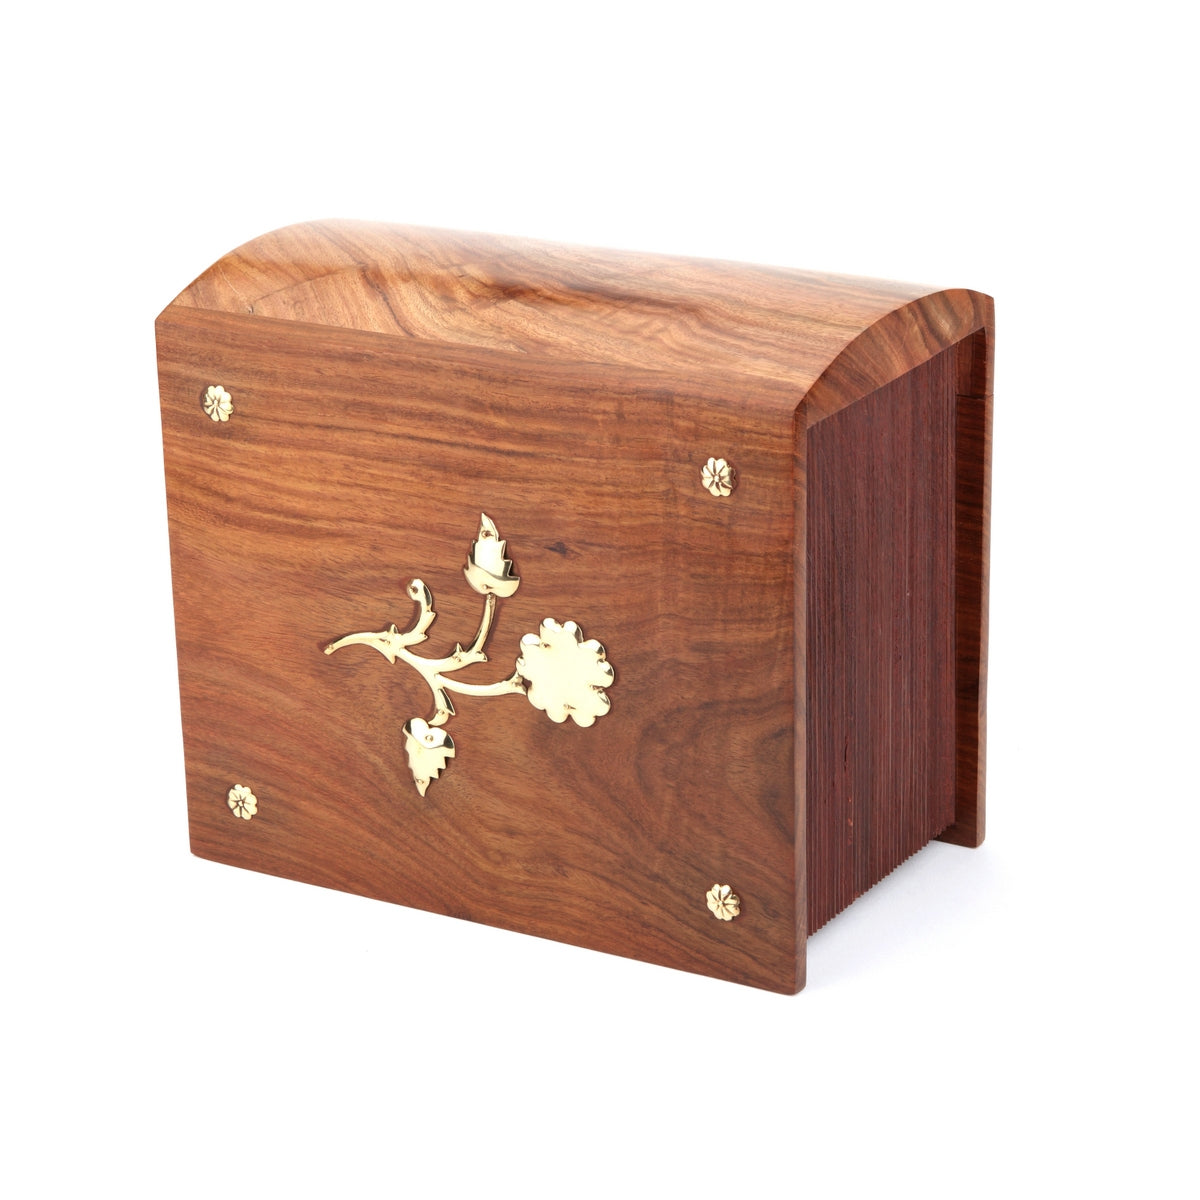 ADULT WOODEN CREMATION URNS FOR ASHES IN THE MEMORY OF YOUR LOVELY BOND SHARED